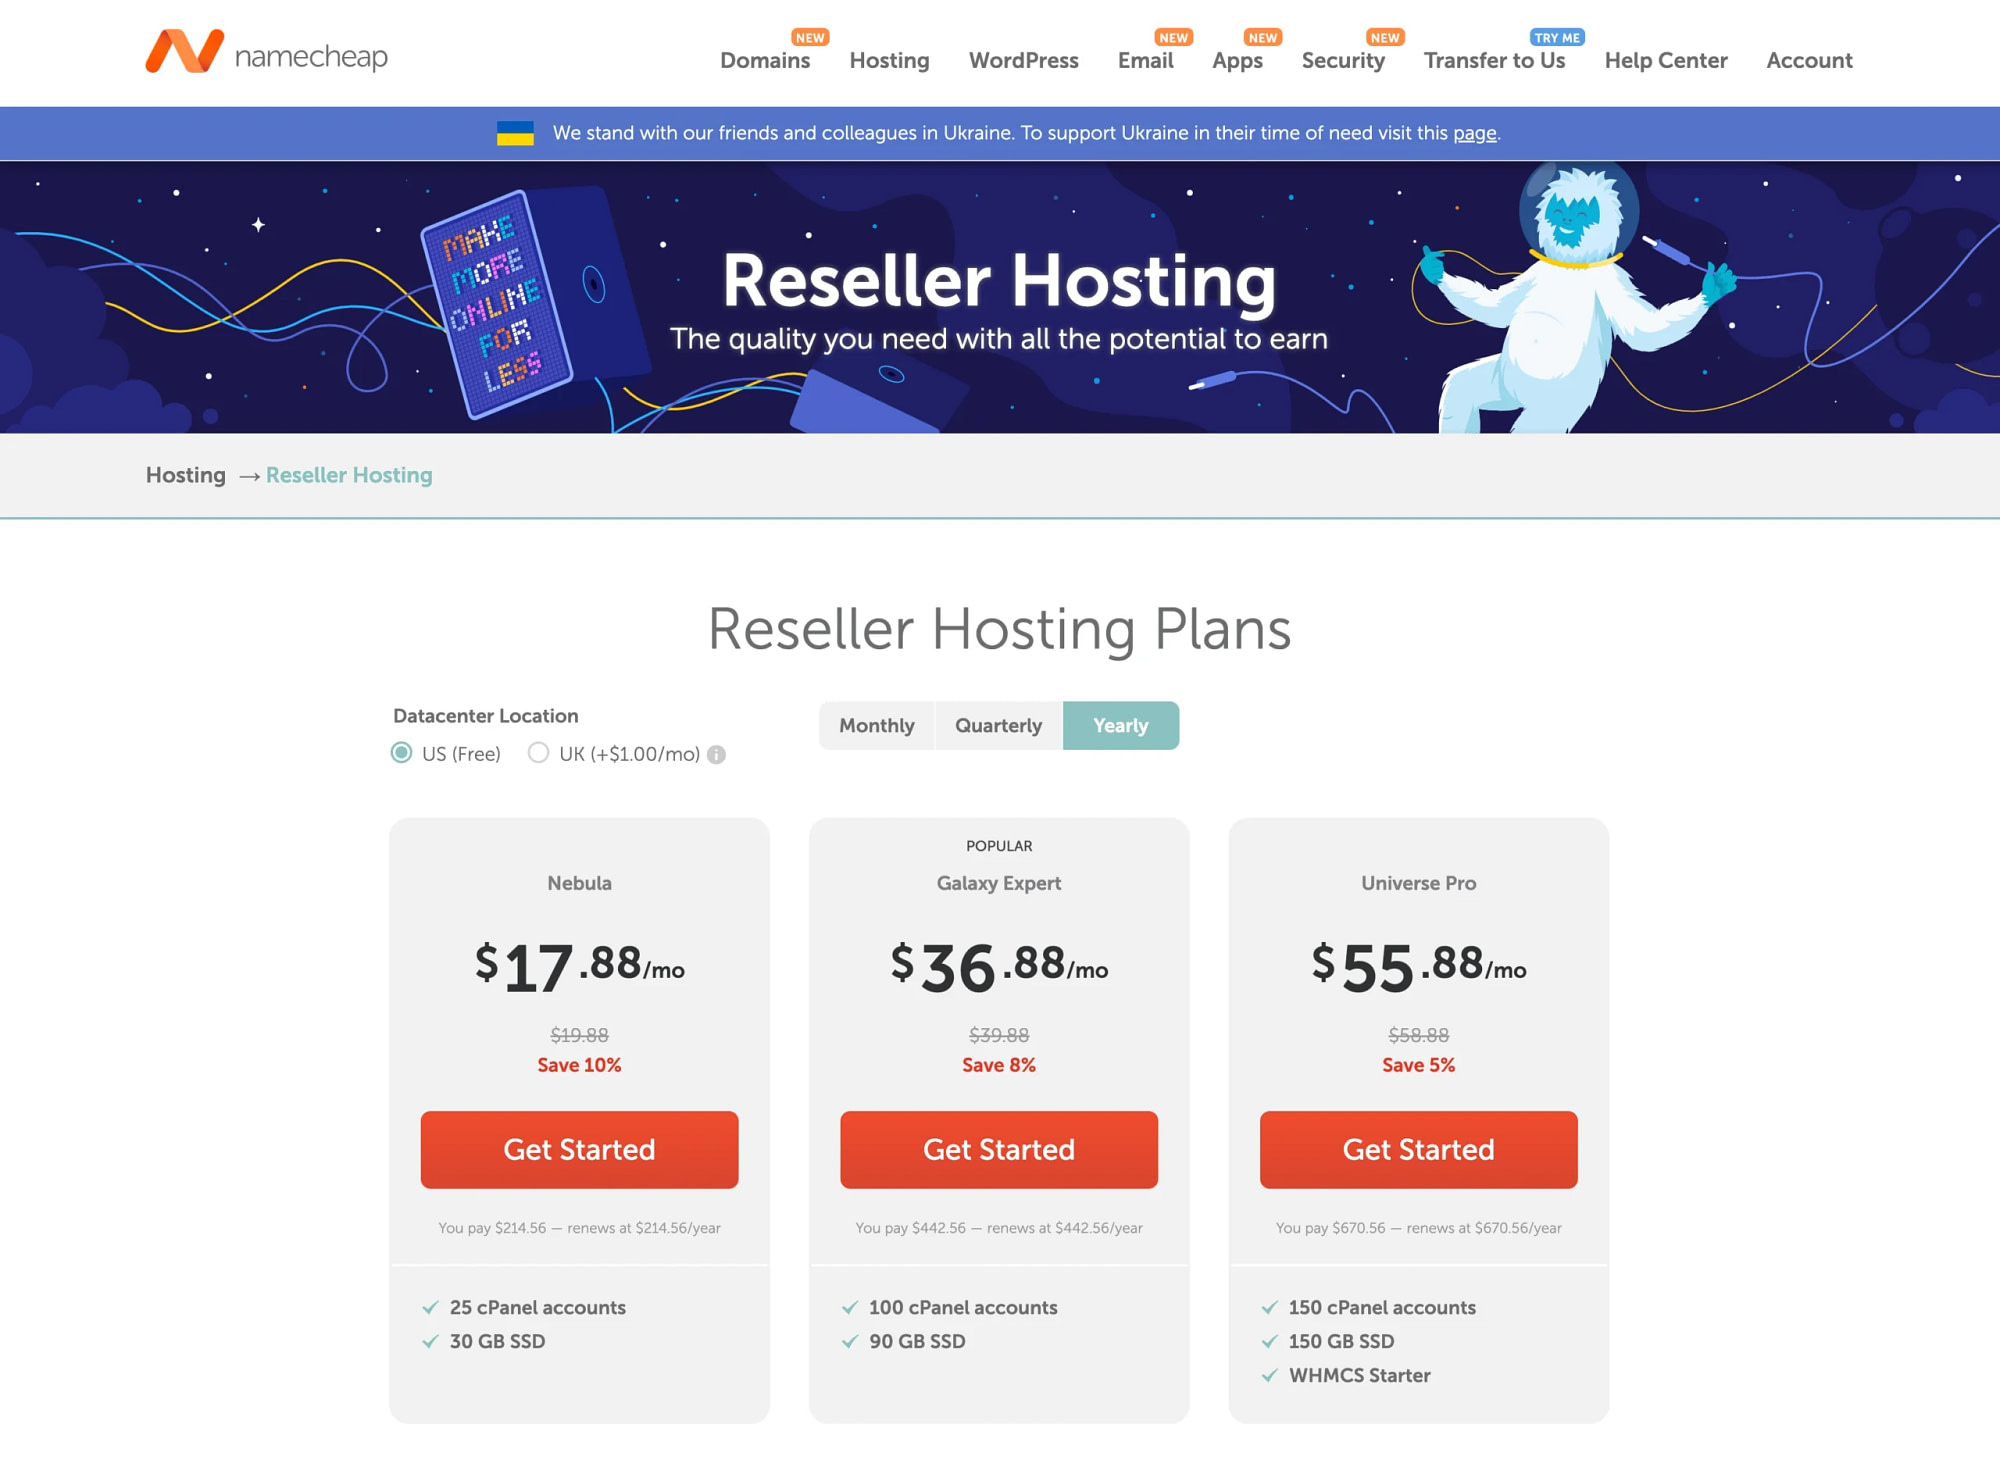 Namecheap Reseller Hosting Page